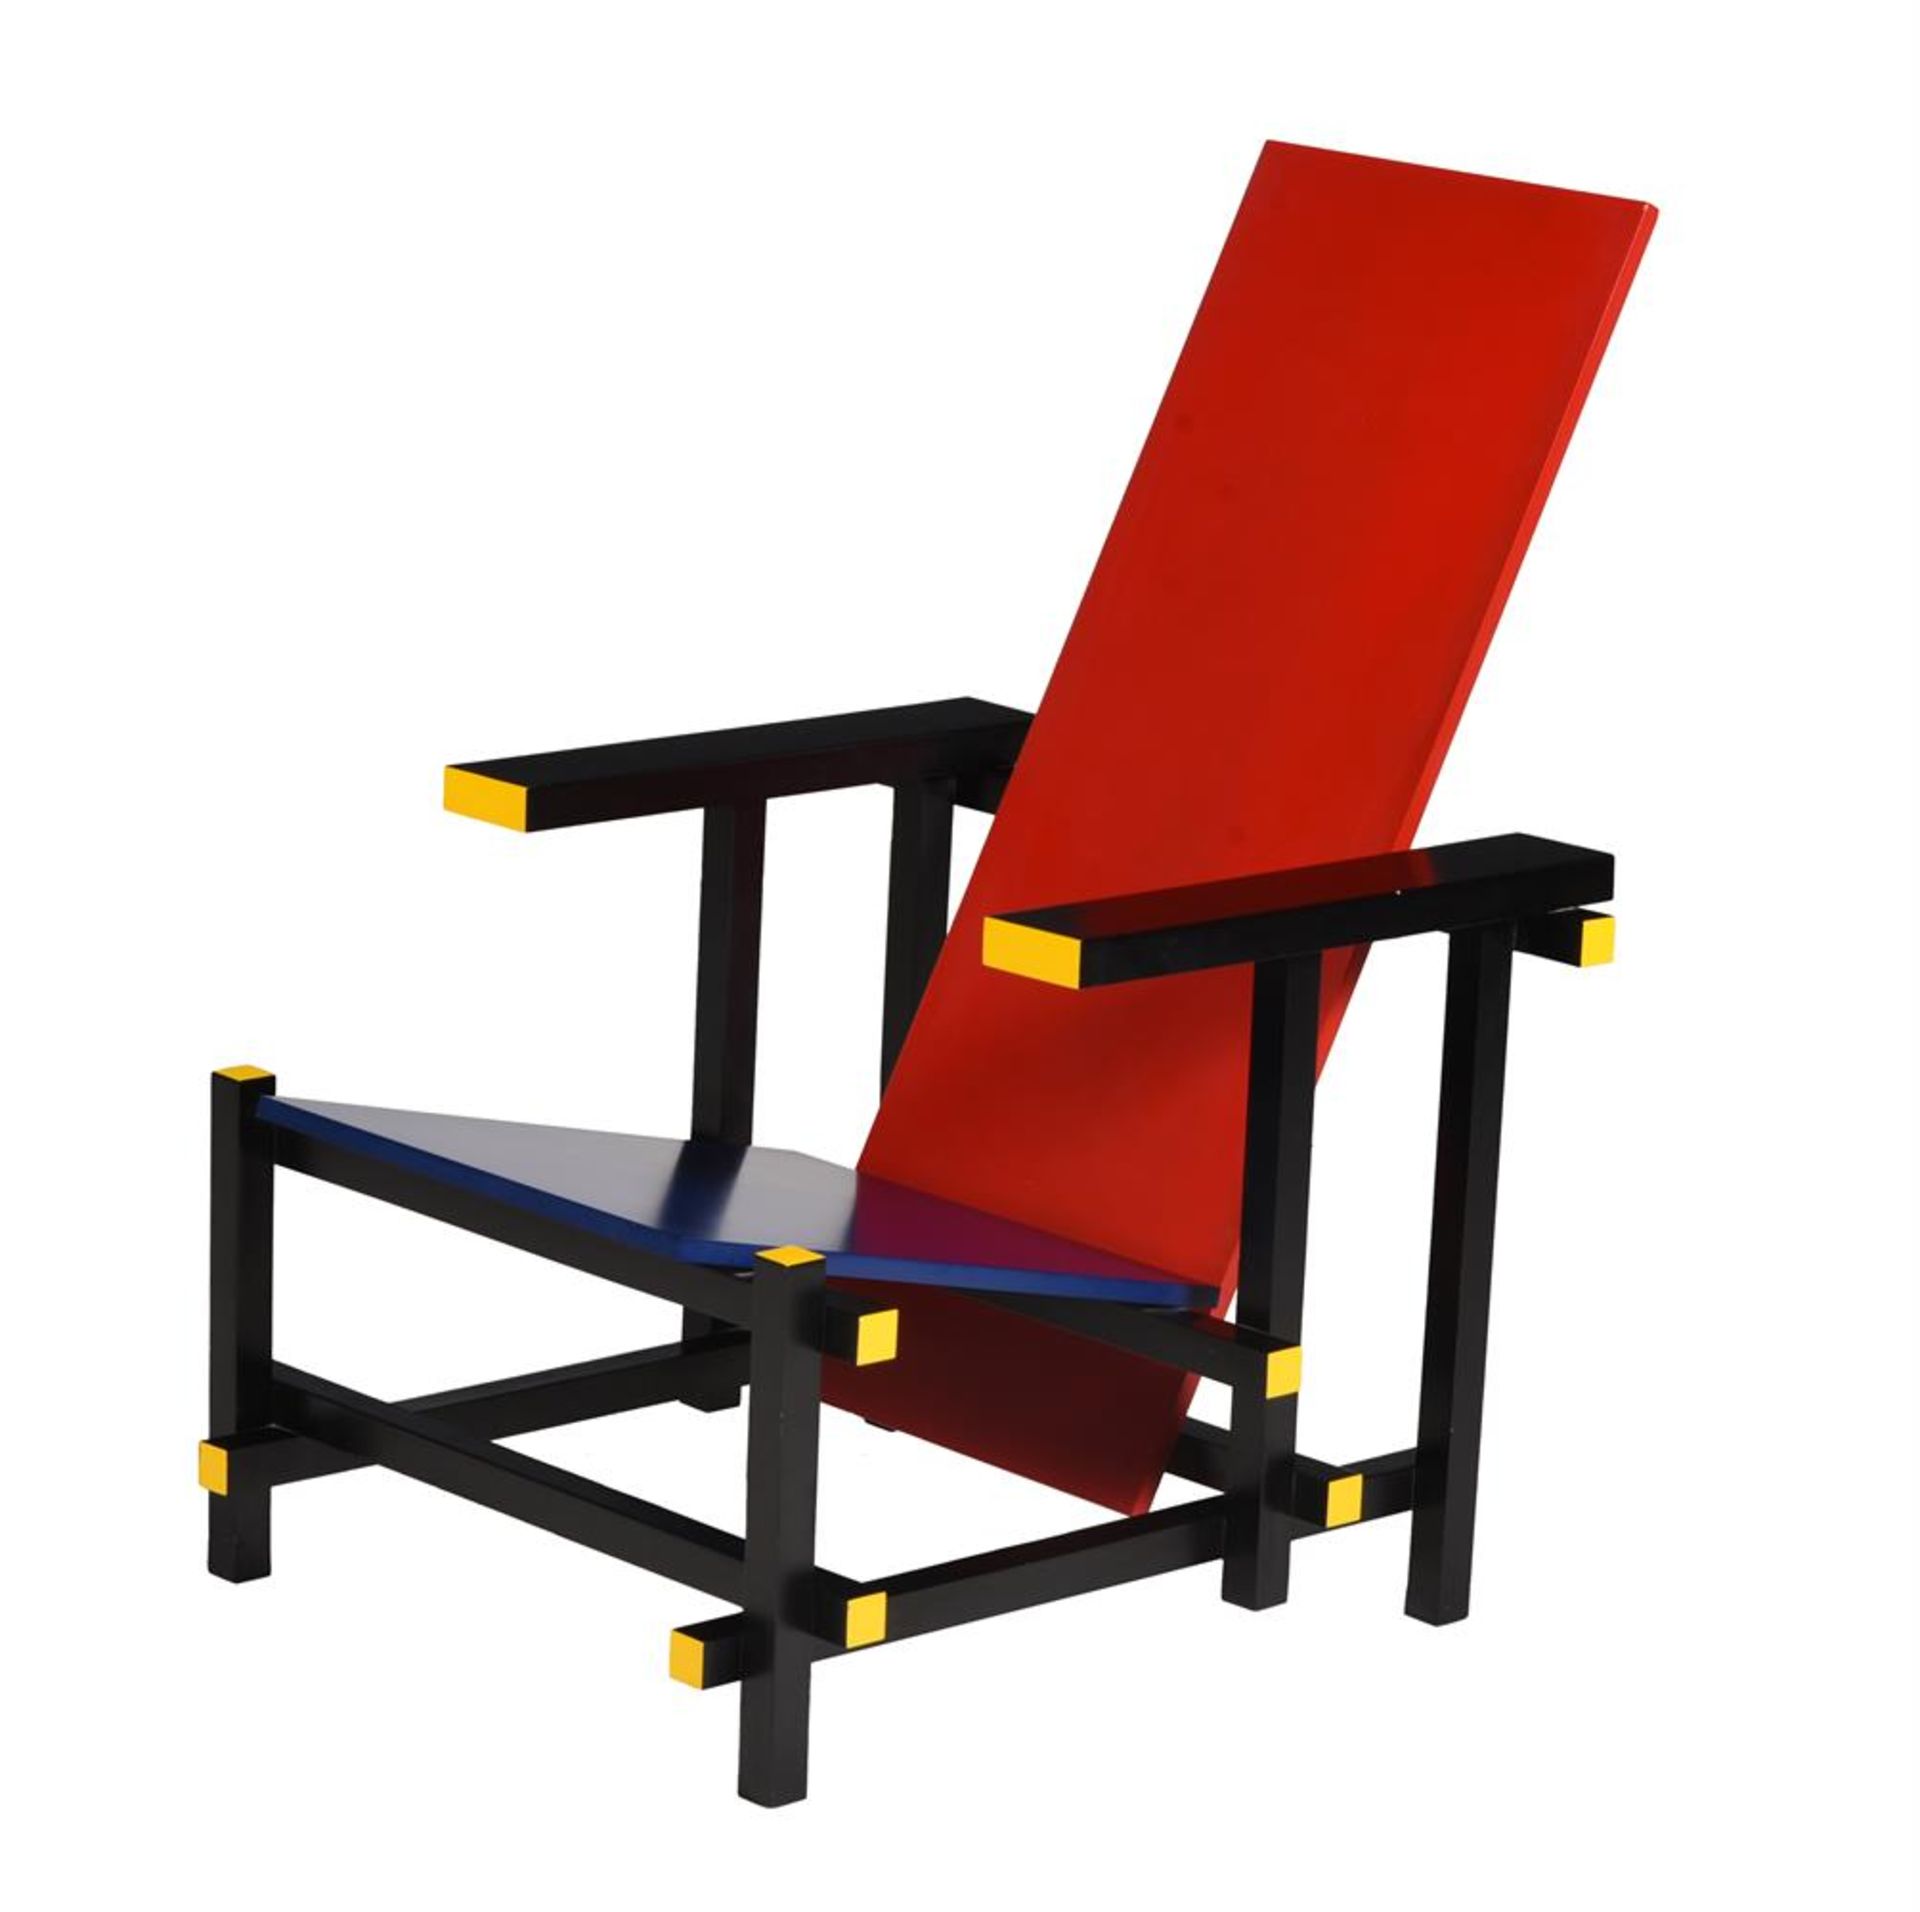 A 'RED & BLUE' CHAIR DESIGNED BY GERRIT REITVELD